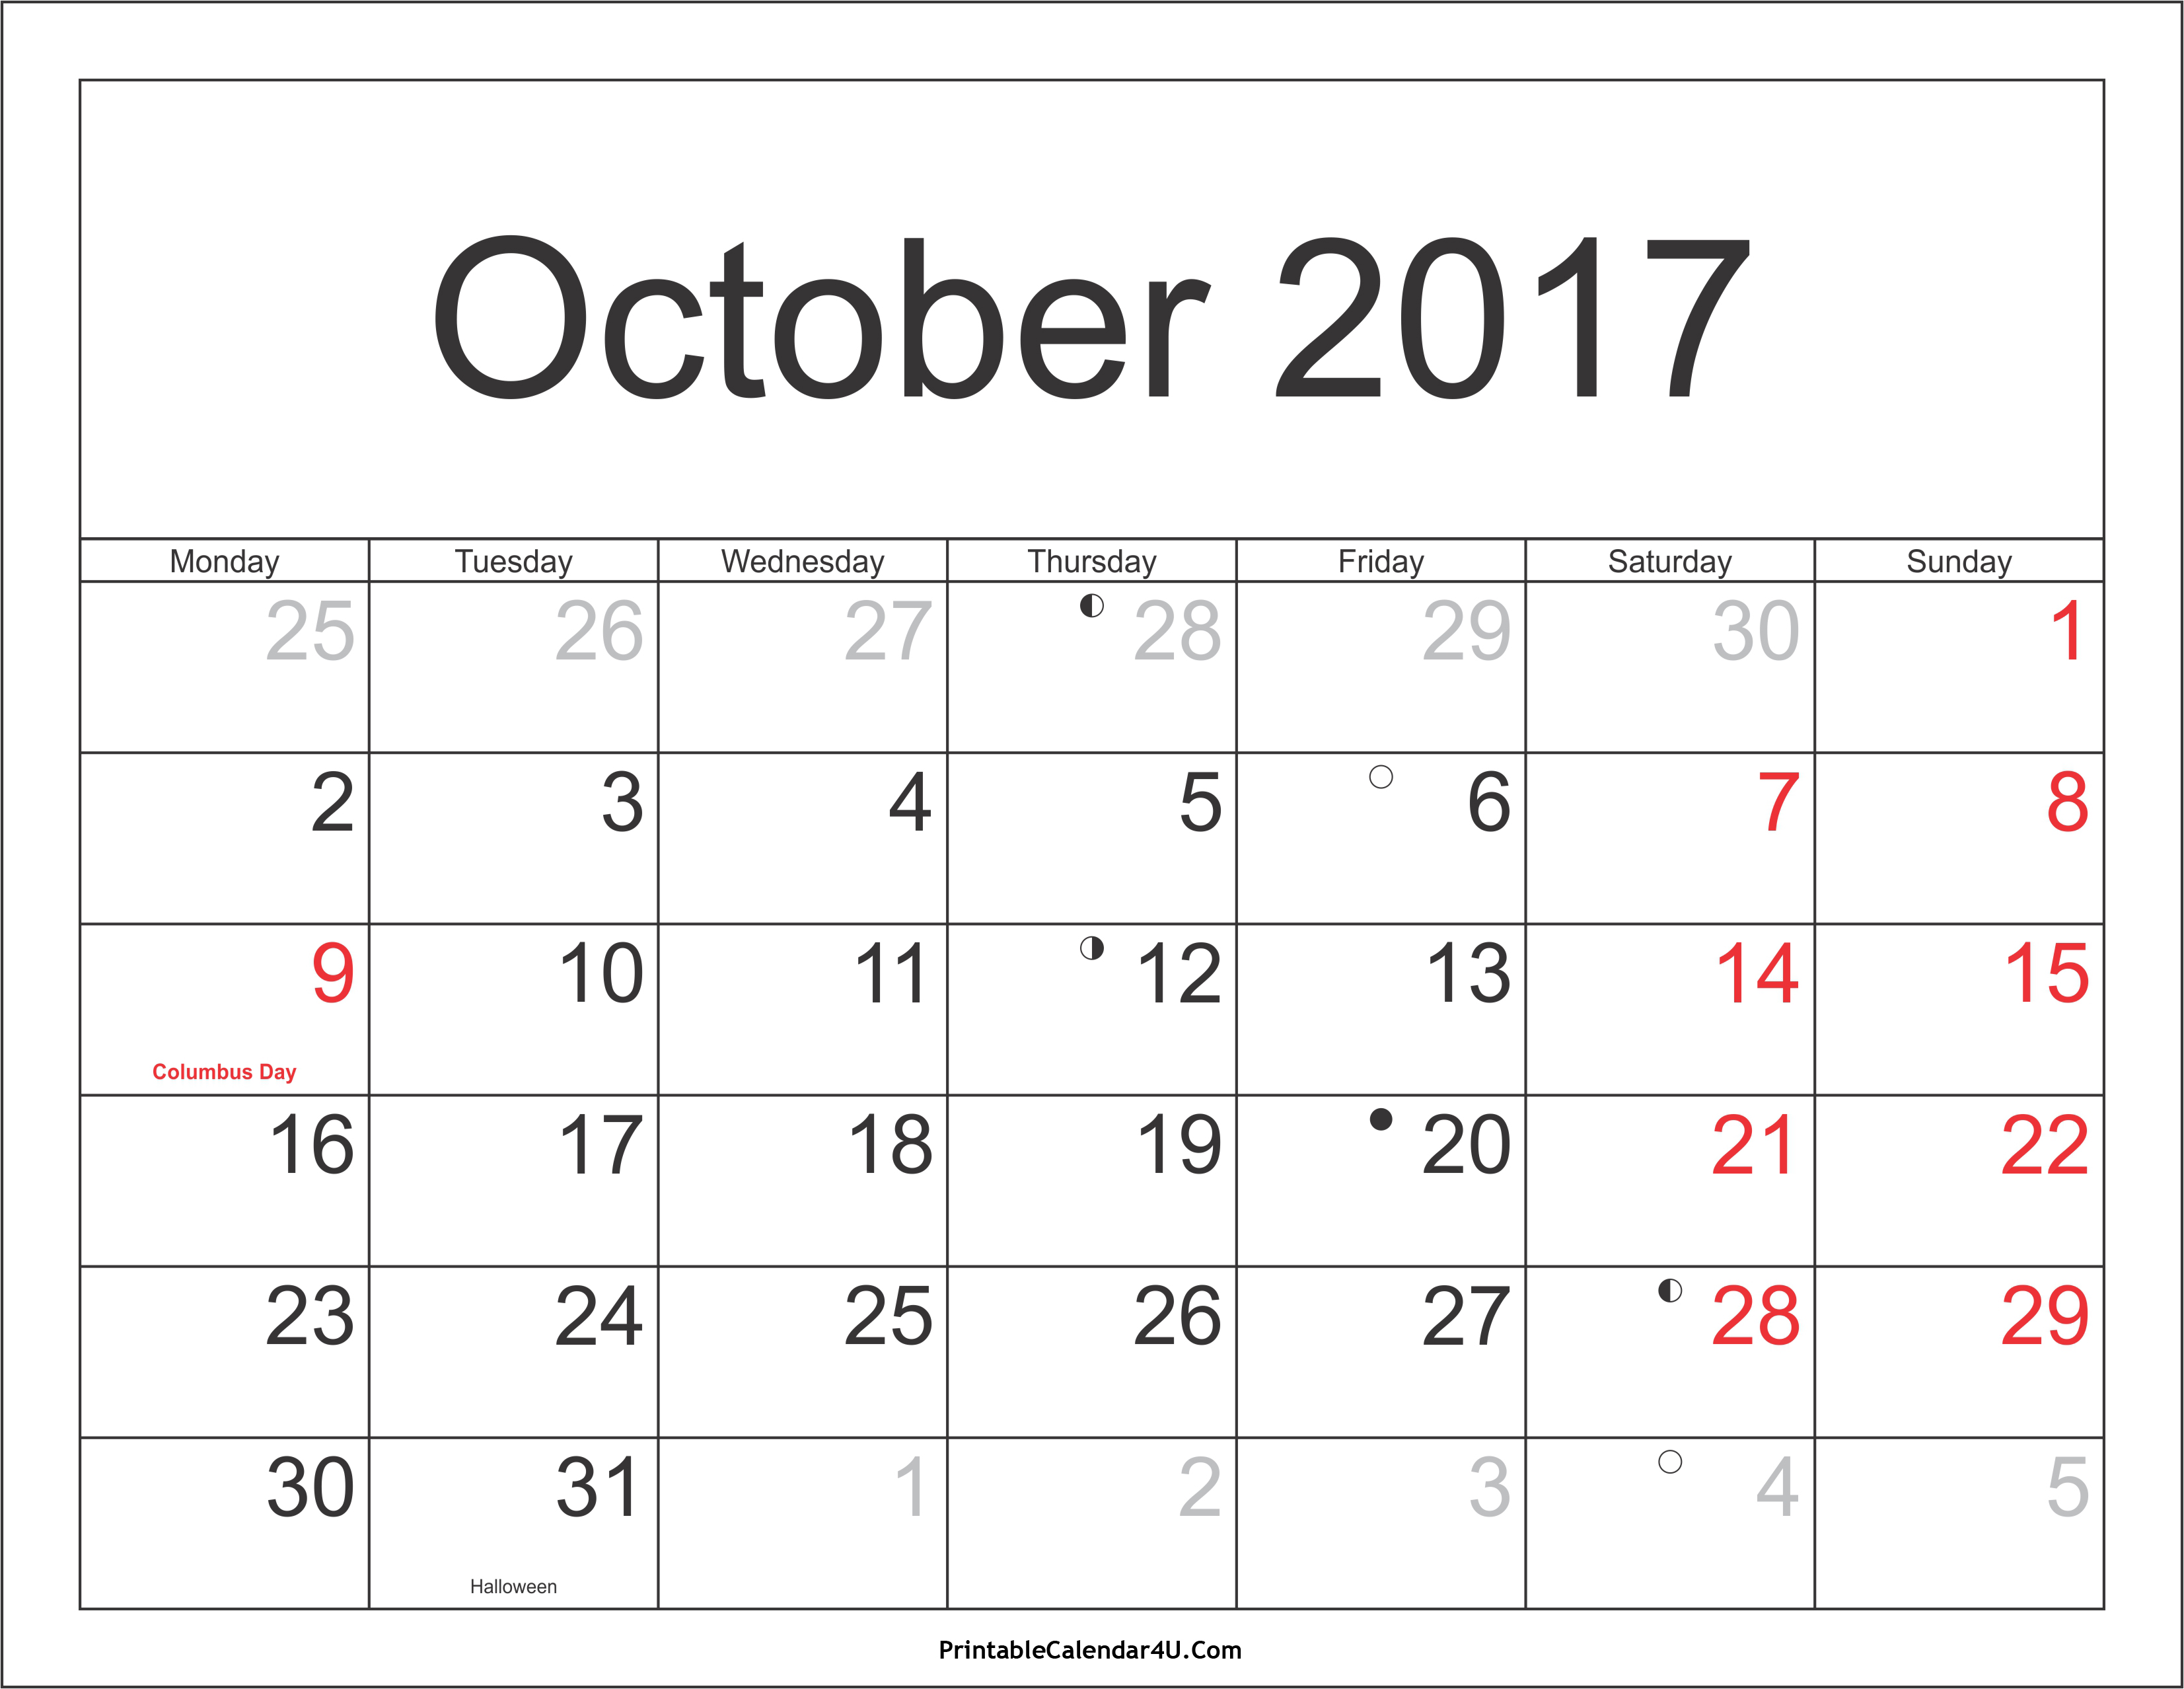 October 2017 Calendar Printable with Holidays PDF and 